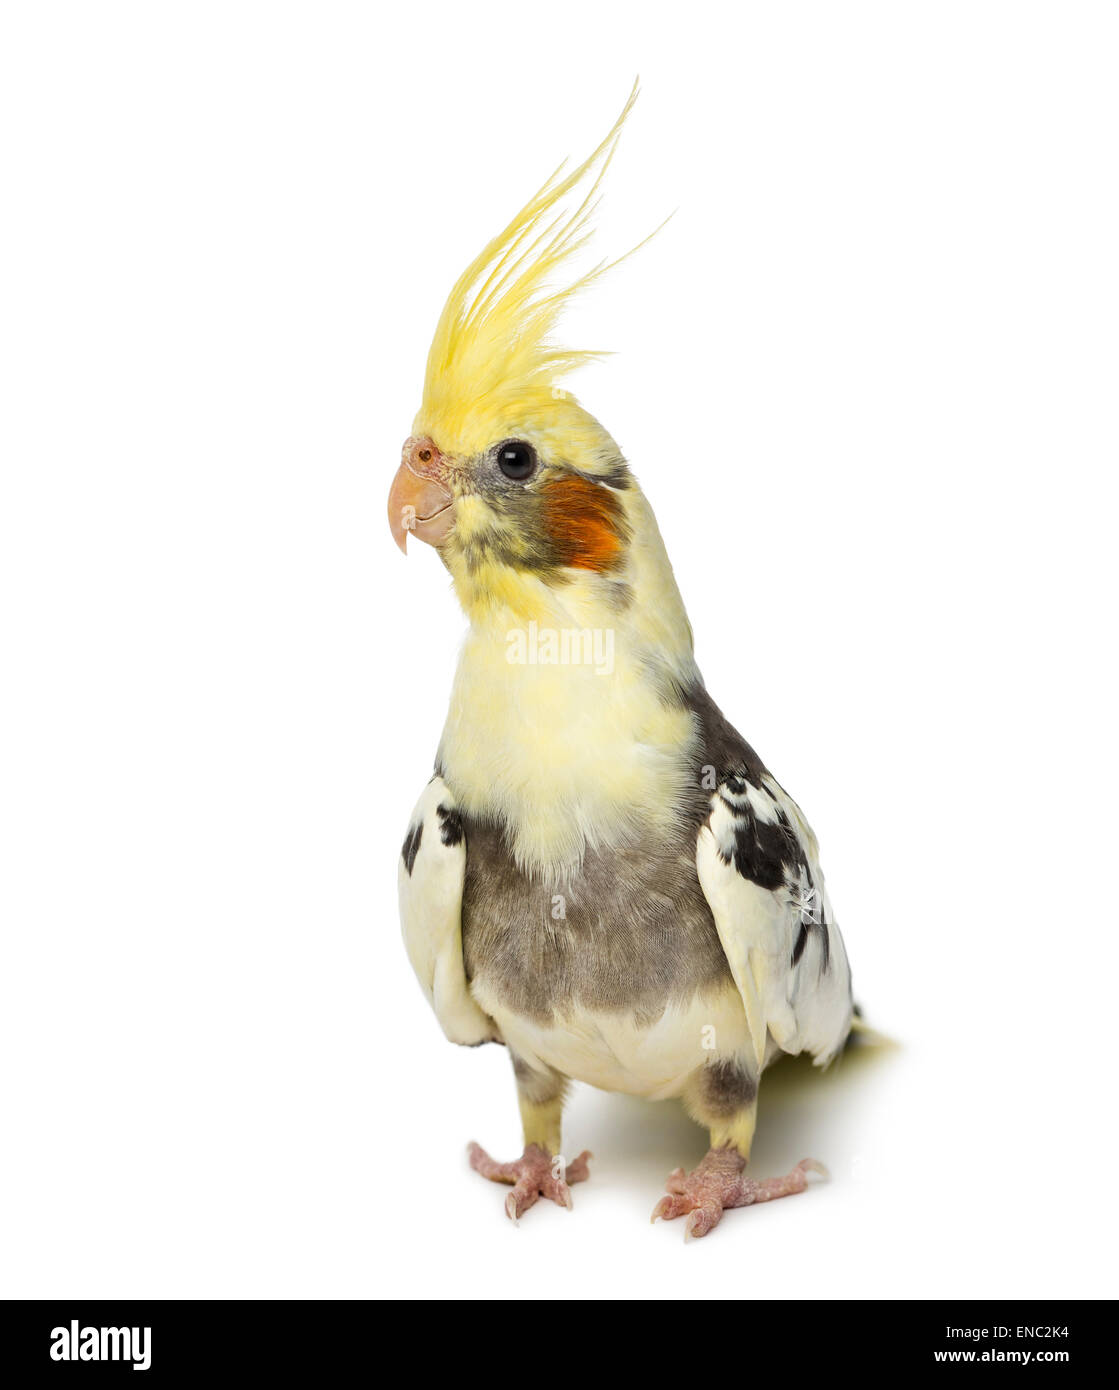 Cockatiel, Nymphicus hollandicus, in front of a white background Stock Photo